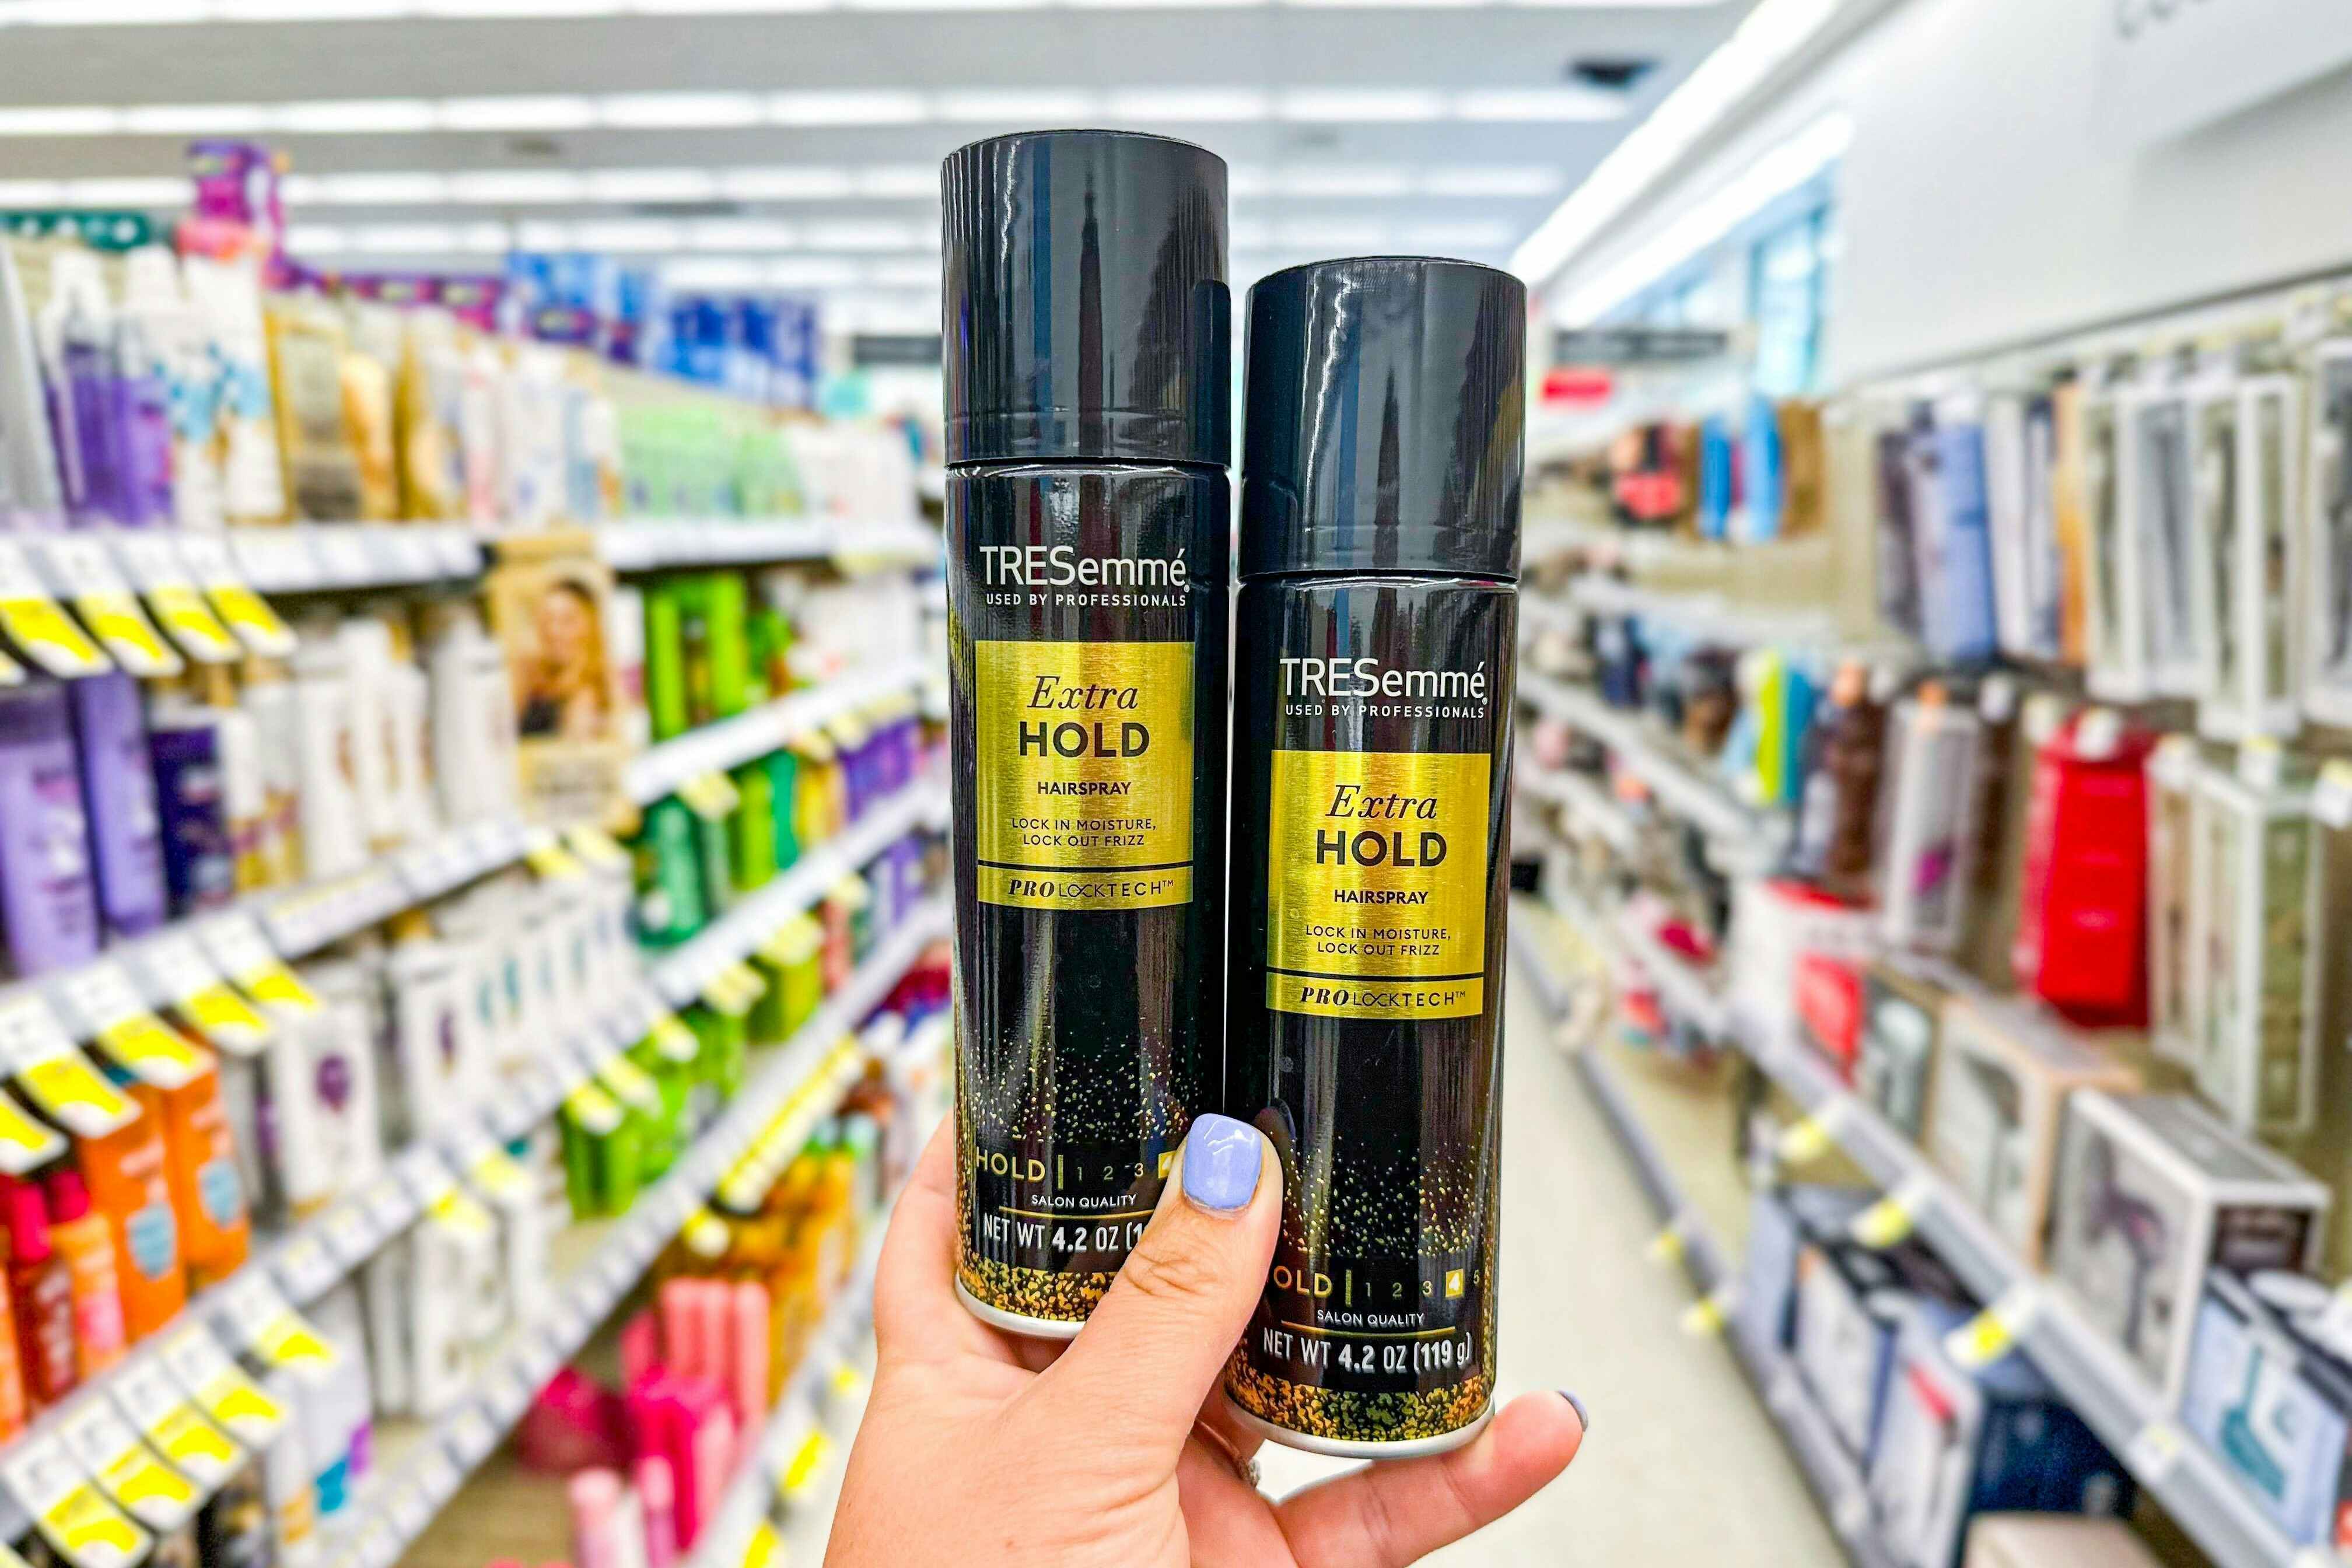 Tresemme Hairspray, as Low as Free at Walgreens